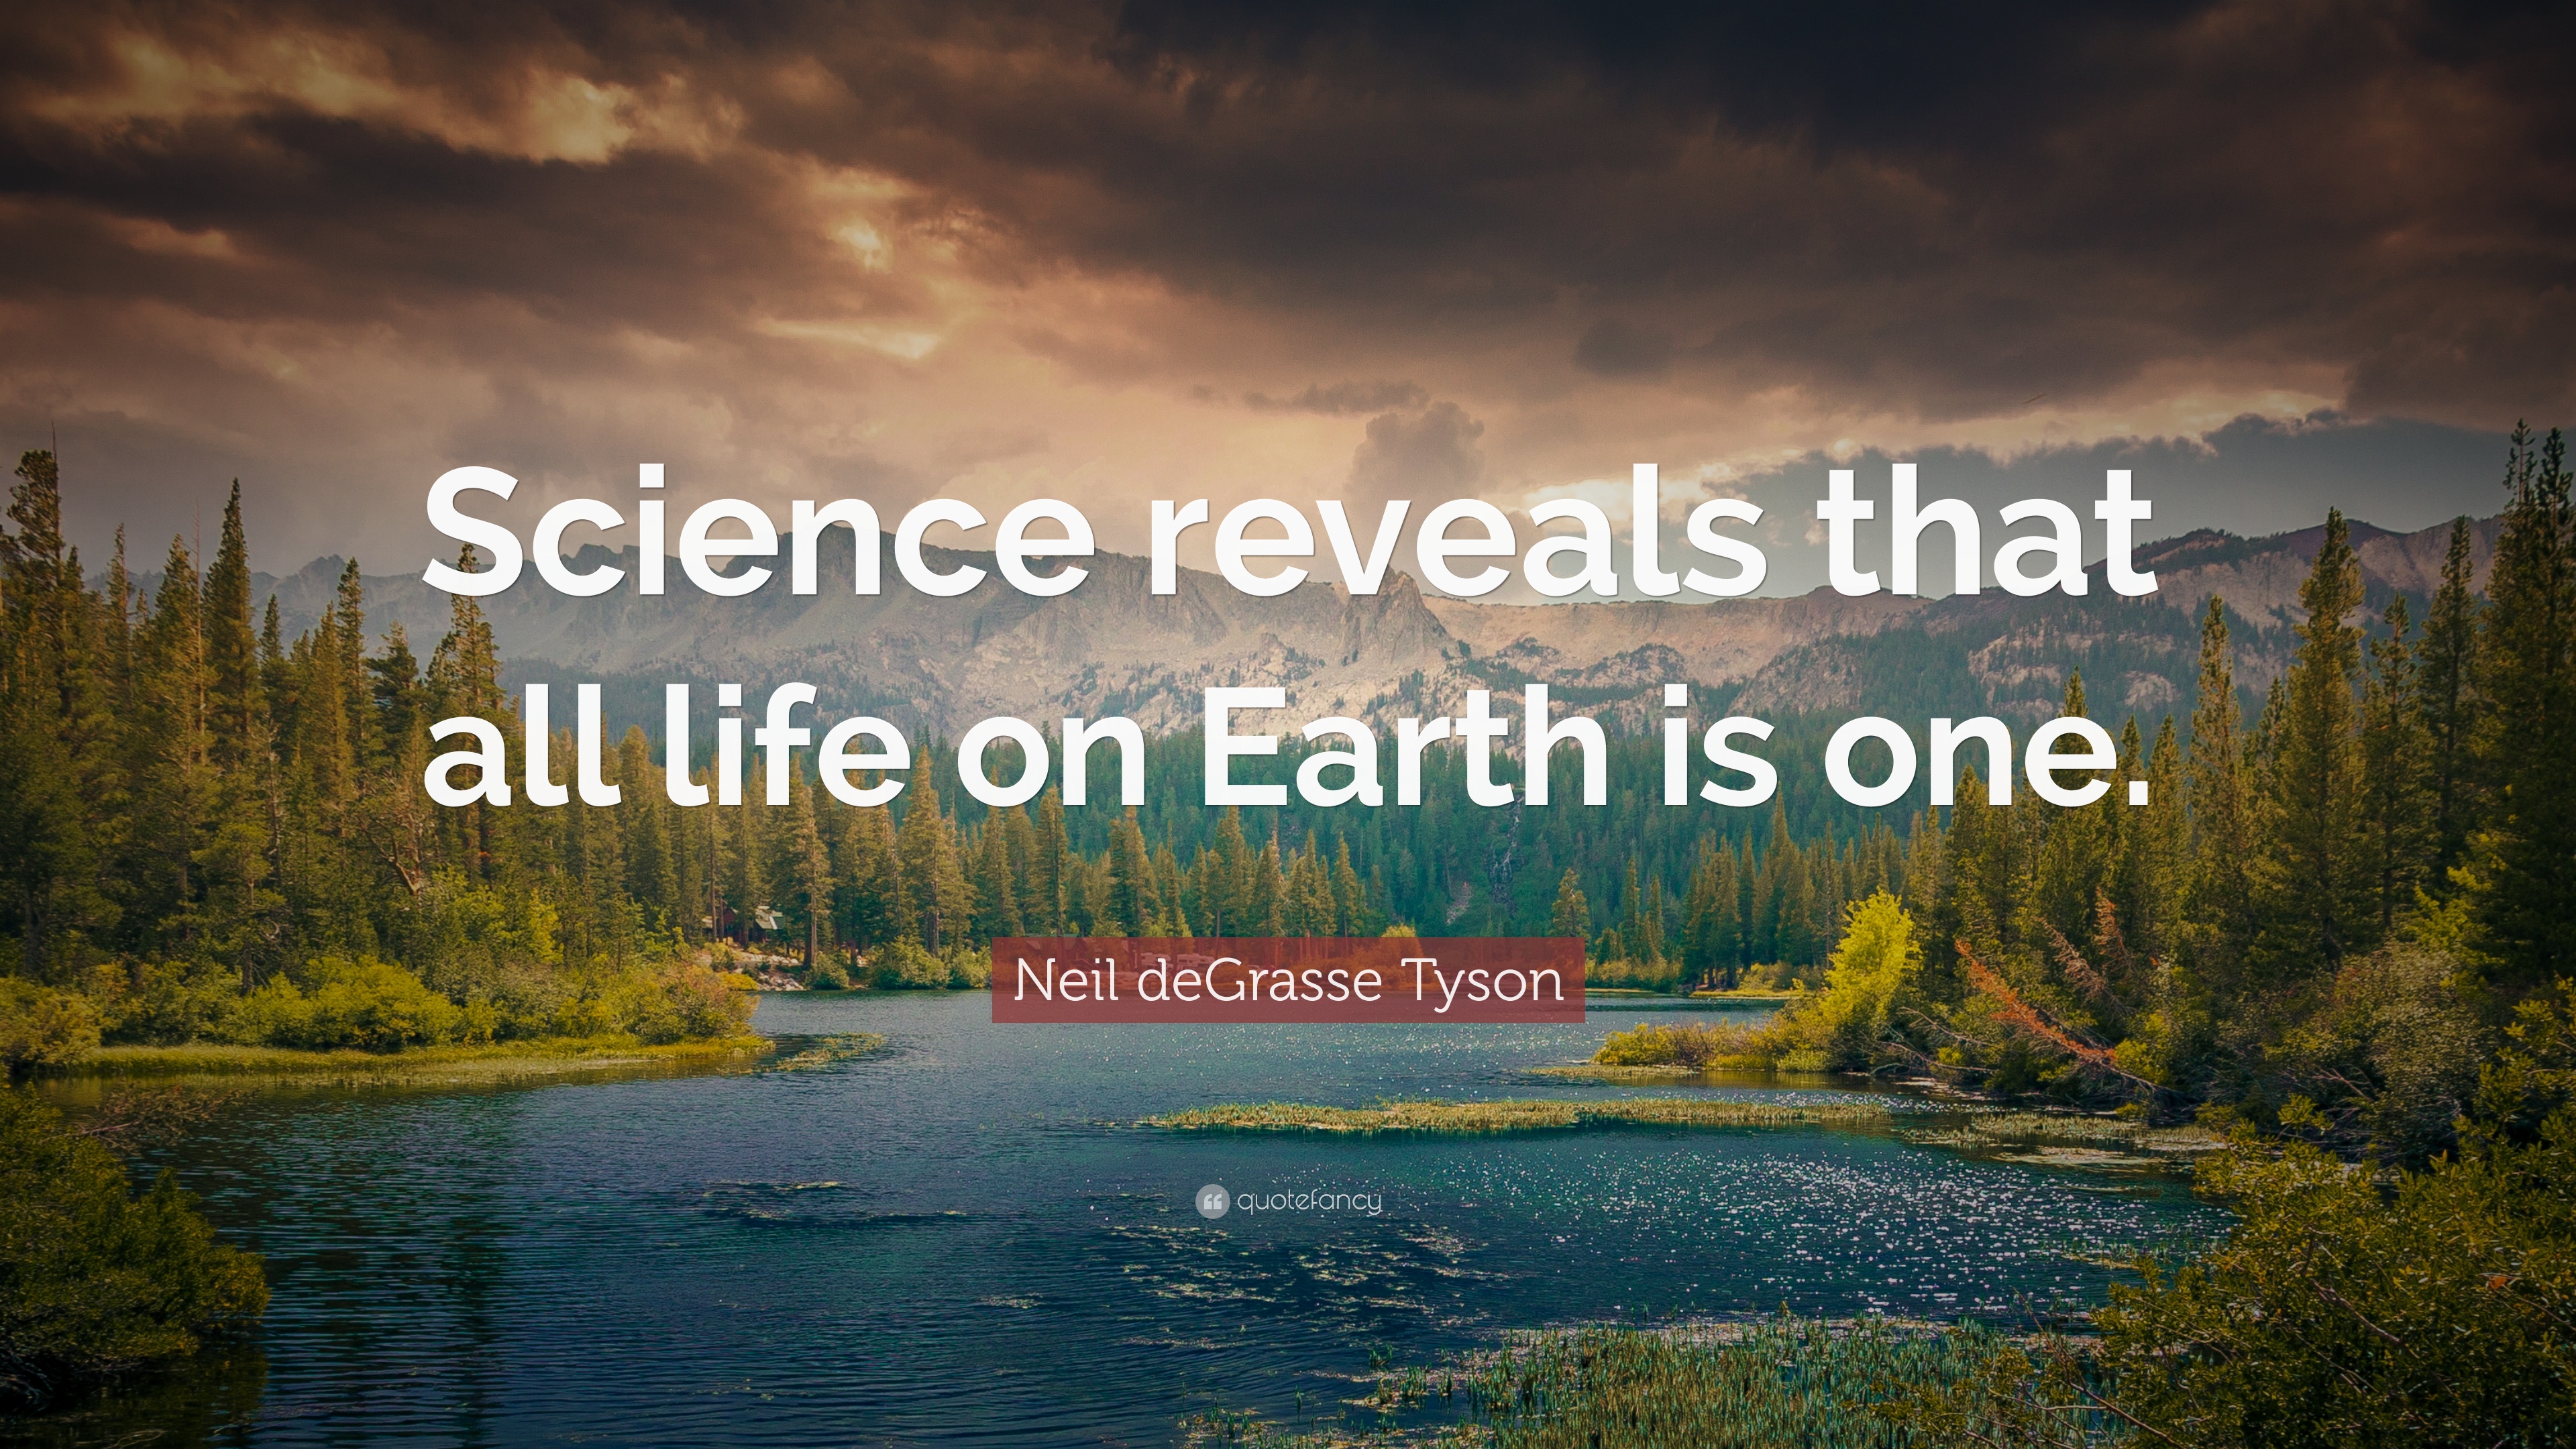 Science reveals that all life on Earth is one.